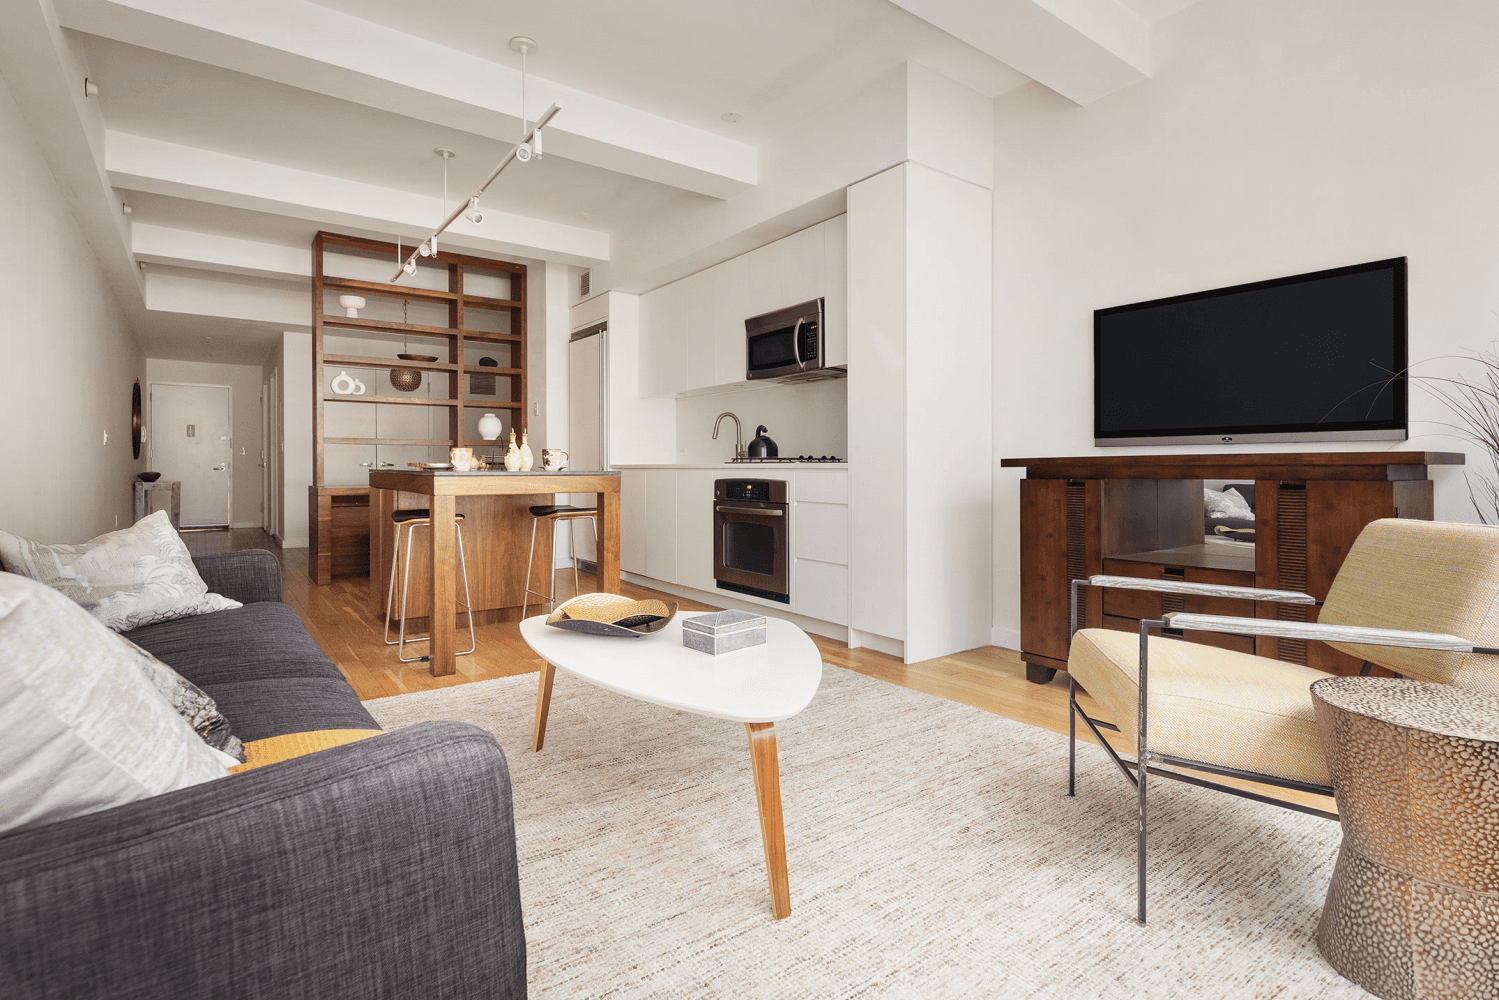 Luxury living at its finest with this meticulously renovated architect's loft condo in the heart of the Financial District.